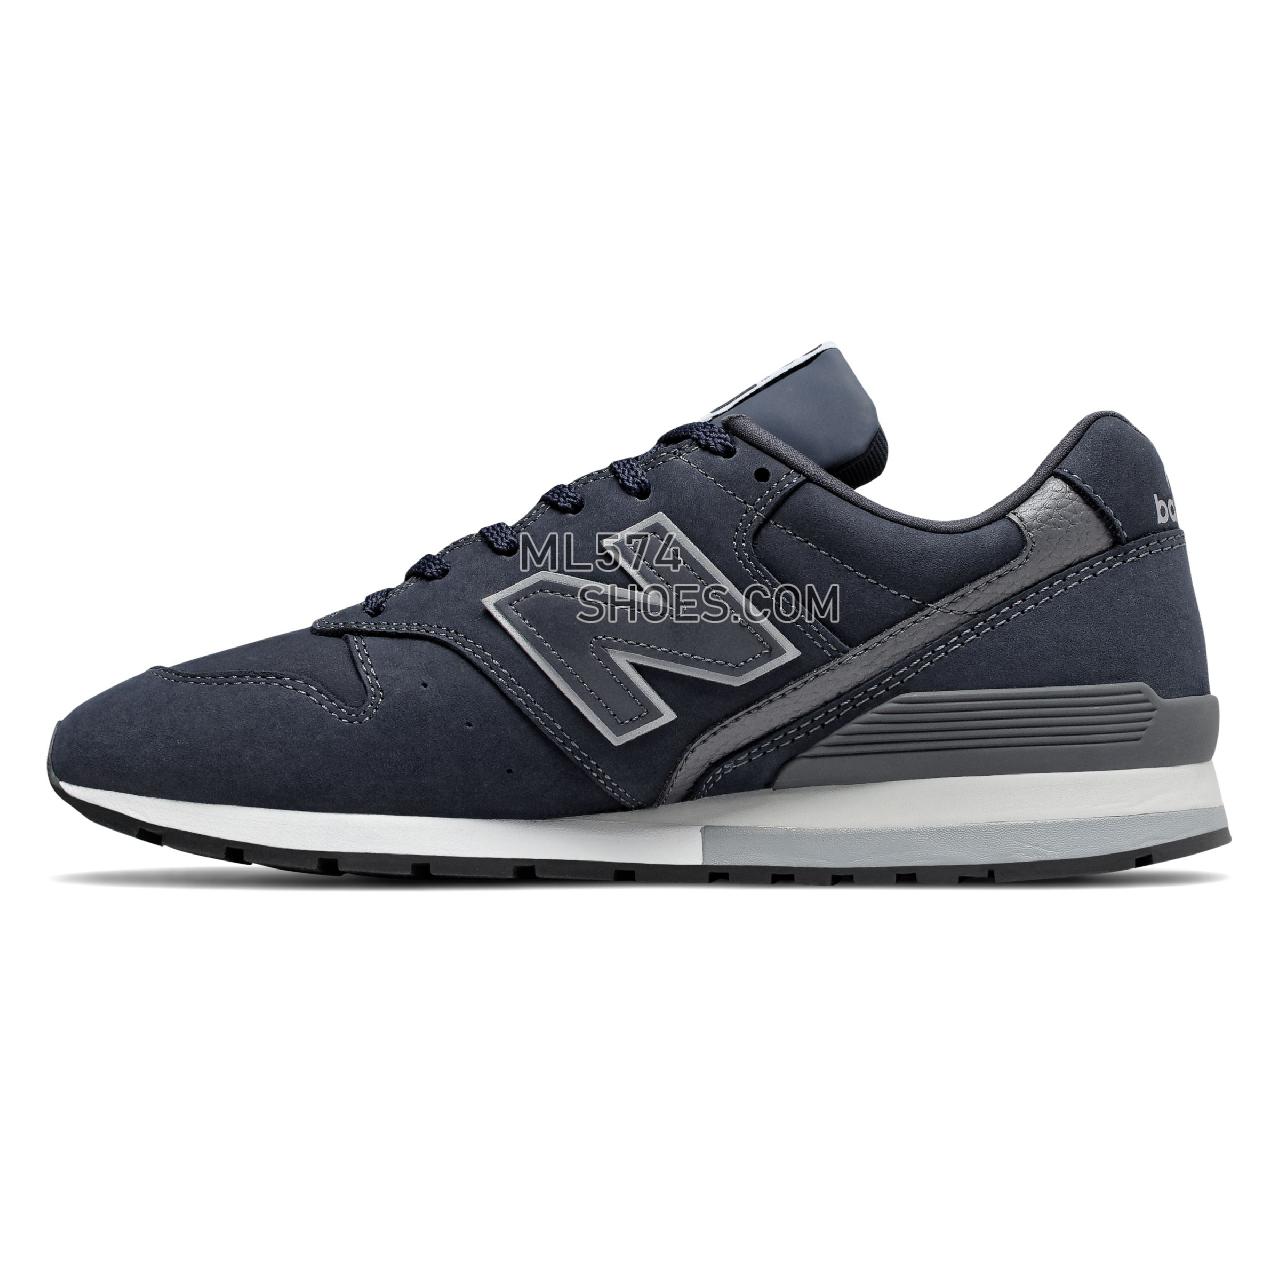 New Balance 996 - Men's 996 Classic CM996V2-27576-M - Eclipse with Silver - CM996RC